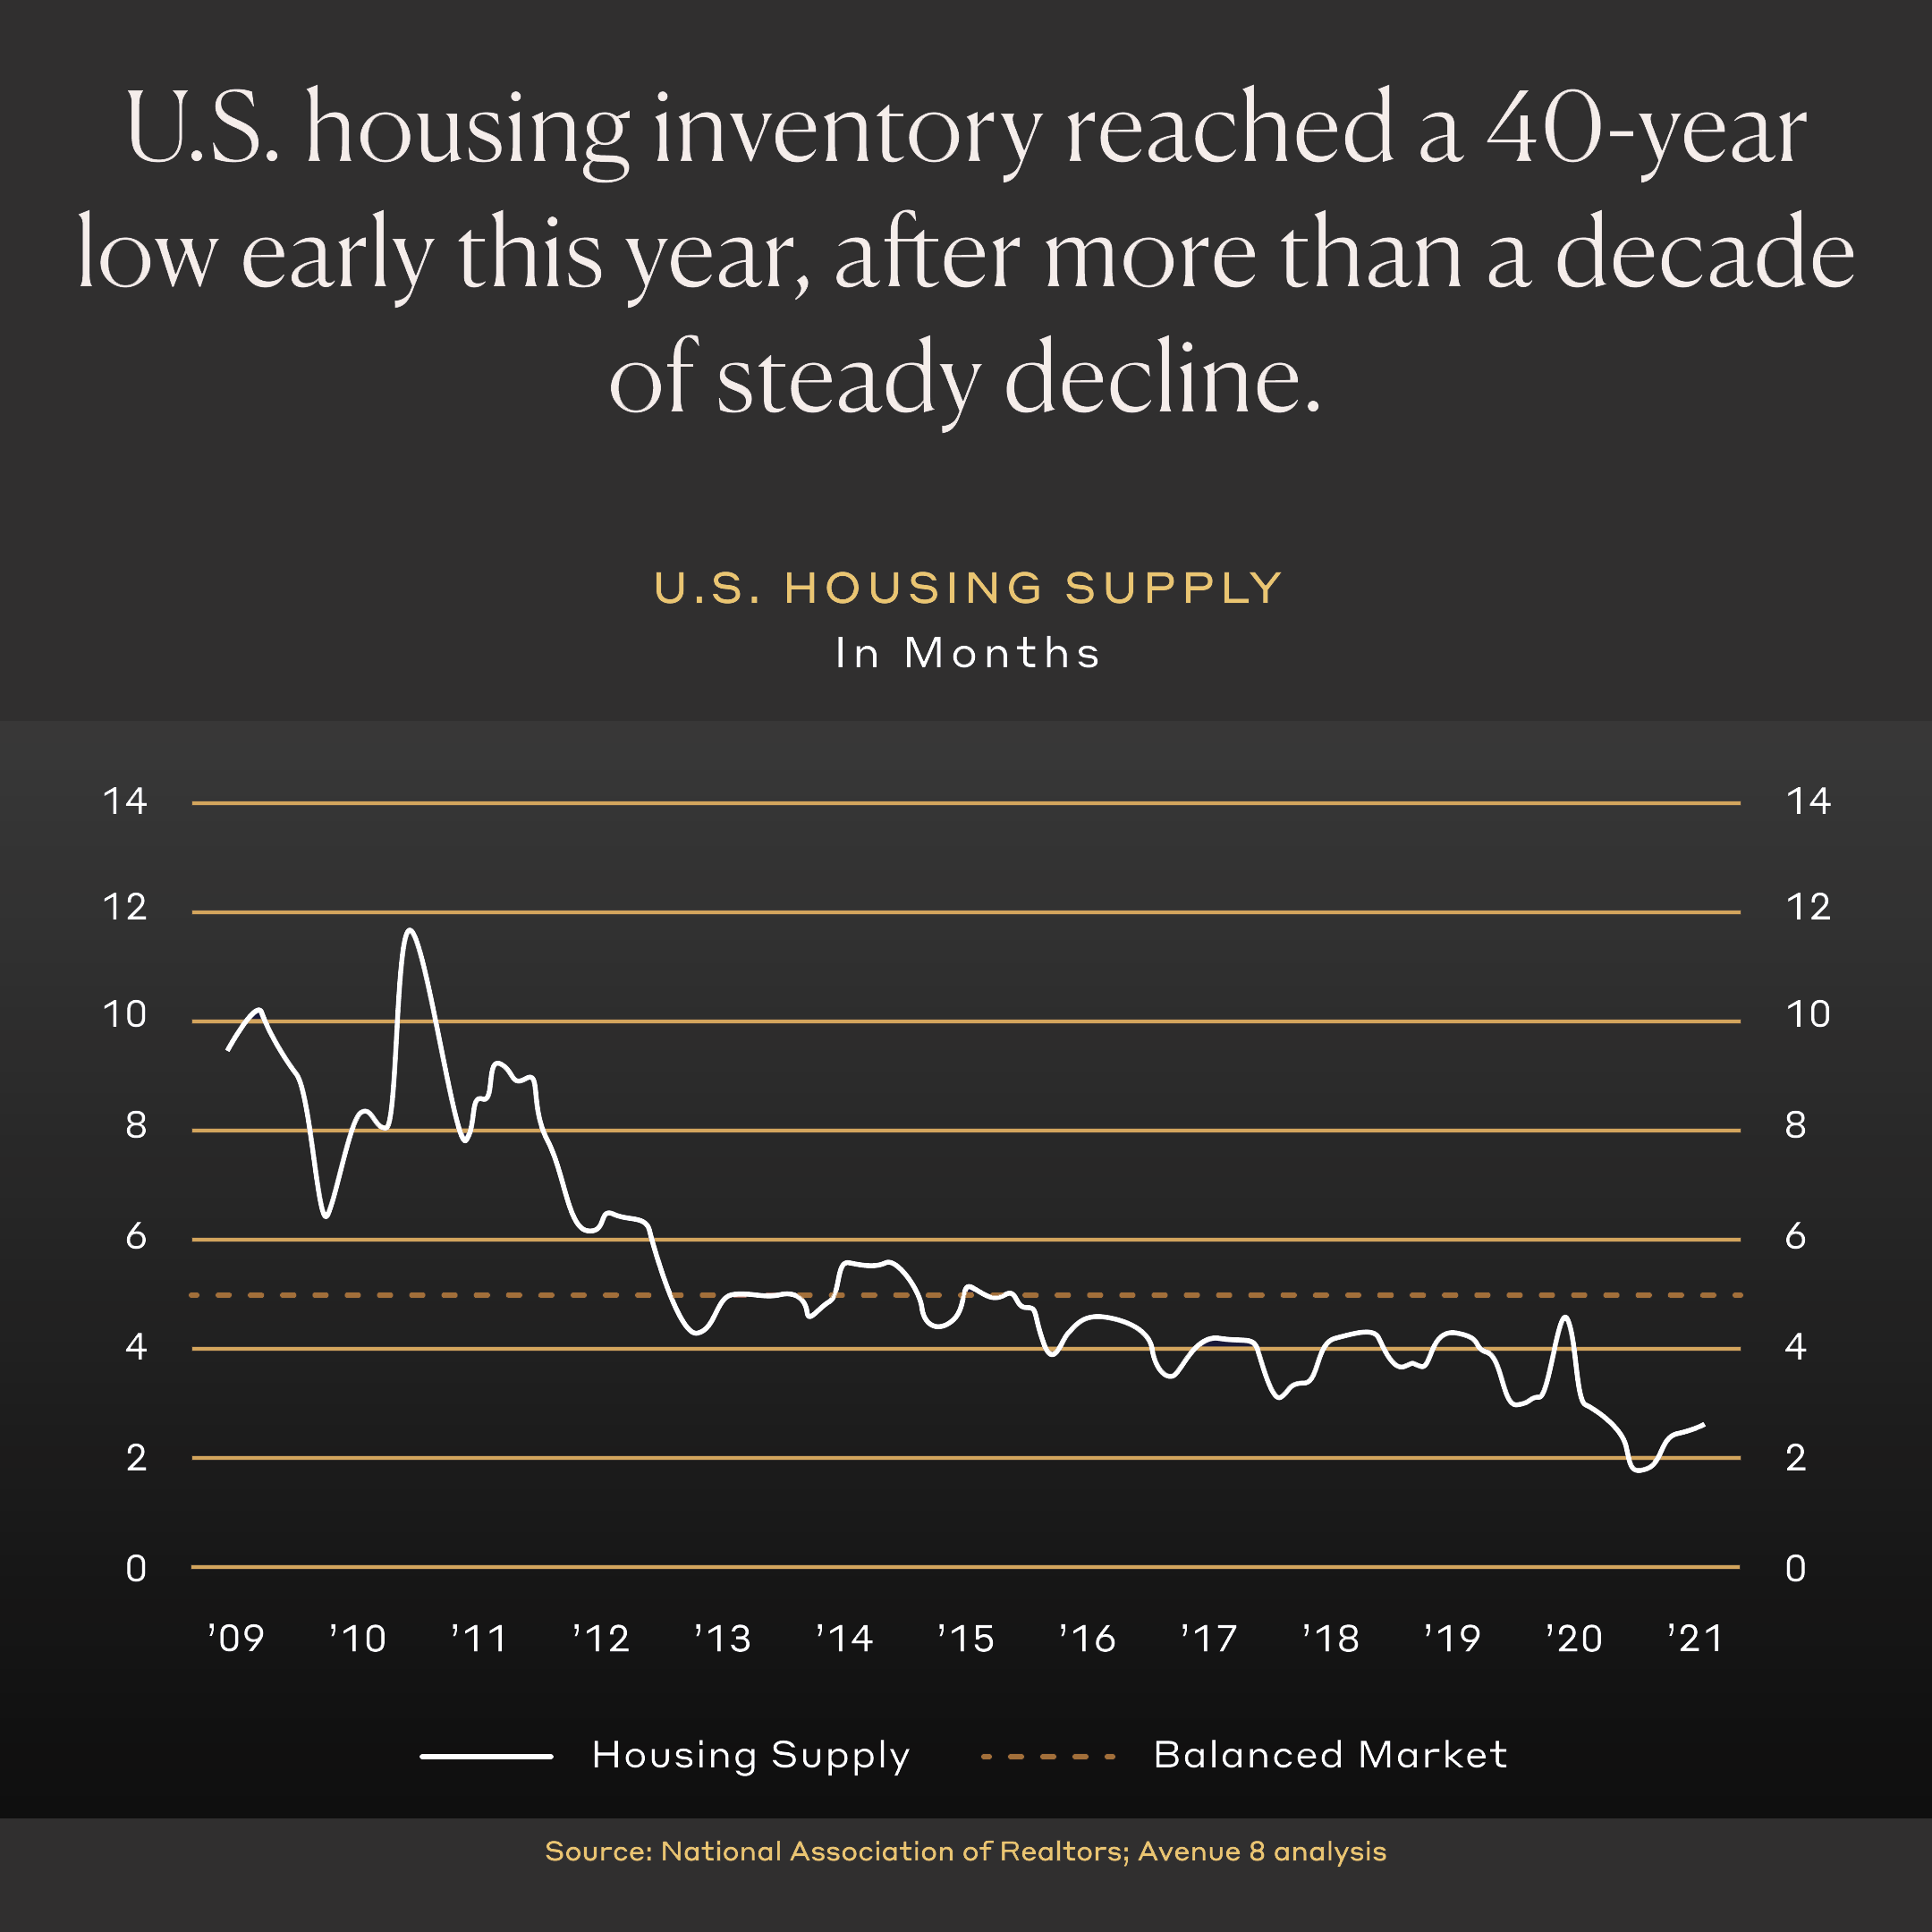 U.S. housing inventory reached a 40-year low early this year, after more than a decade of steady decline.